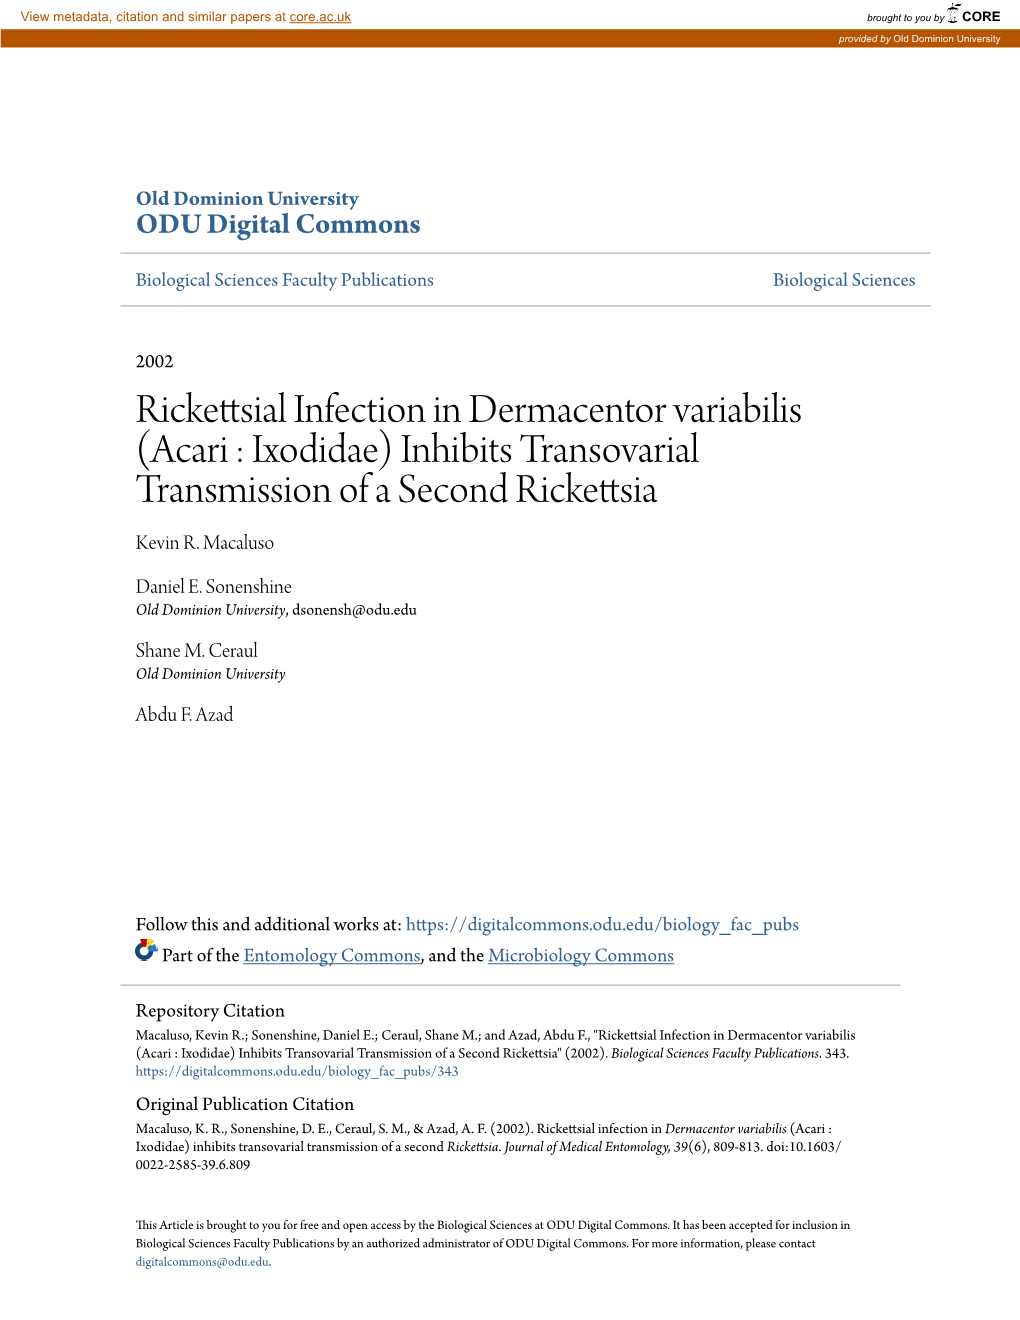 Rickettsial Infection in Dermacentor Variabilis (Acari : Ixodidae) Inhibits Transovarial Transmission of a Second Rickettsia Kevin R